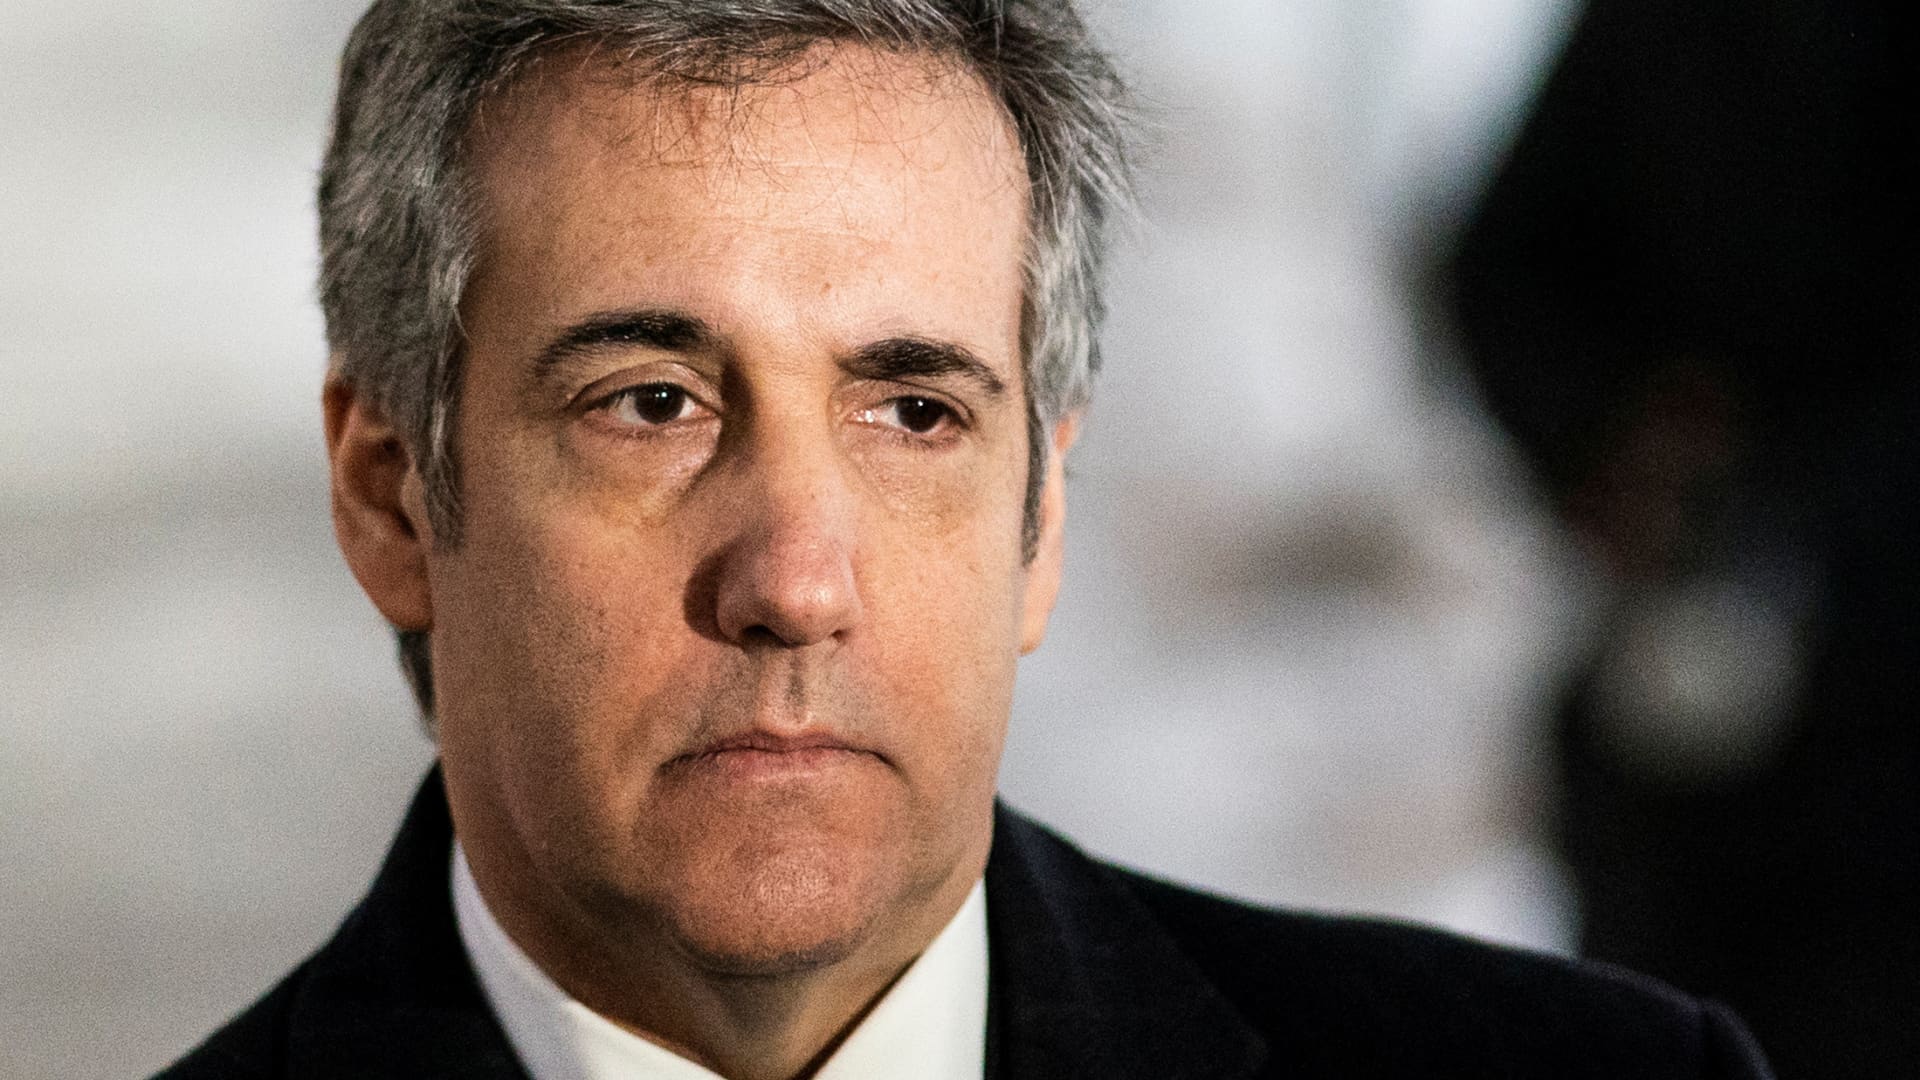 Former Trump lawyer Michael Cohen testifies to grand jury for three hours, will return Wednesday